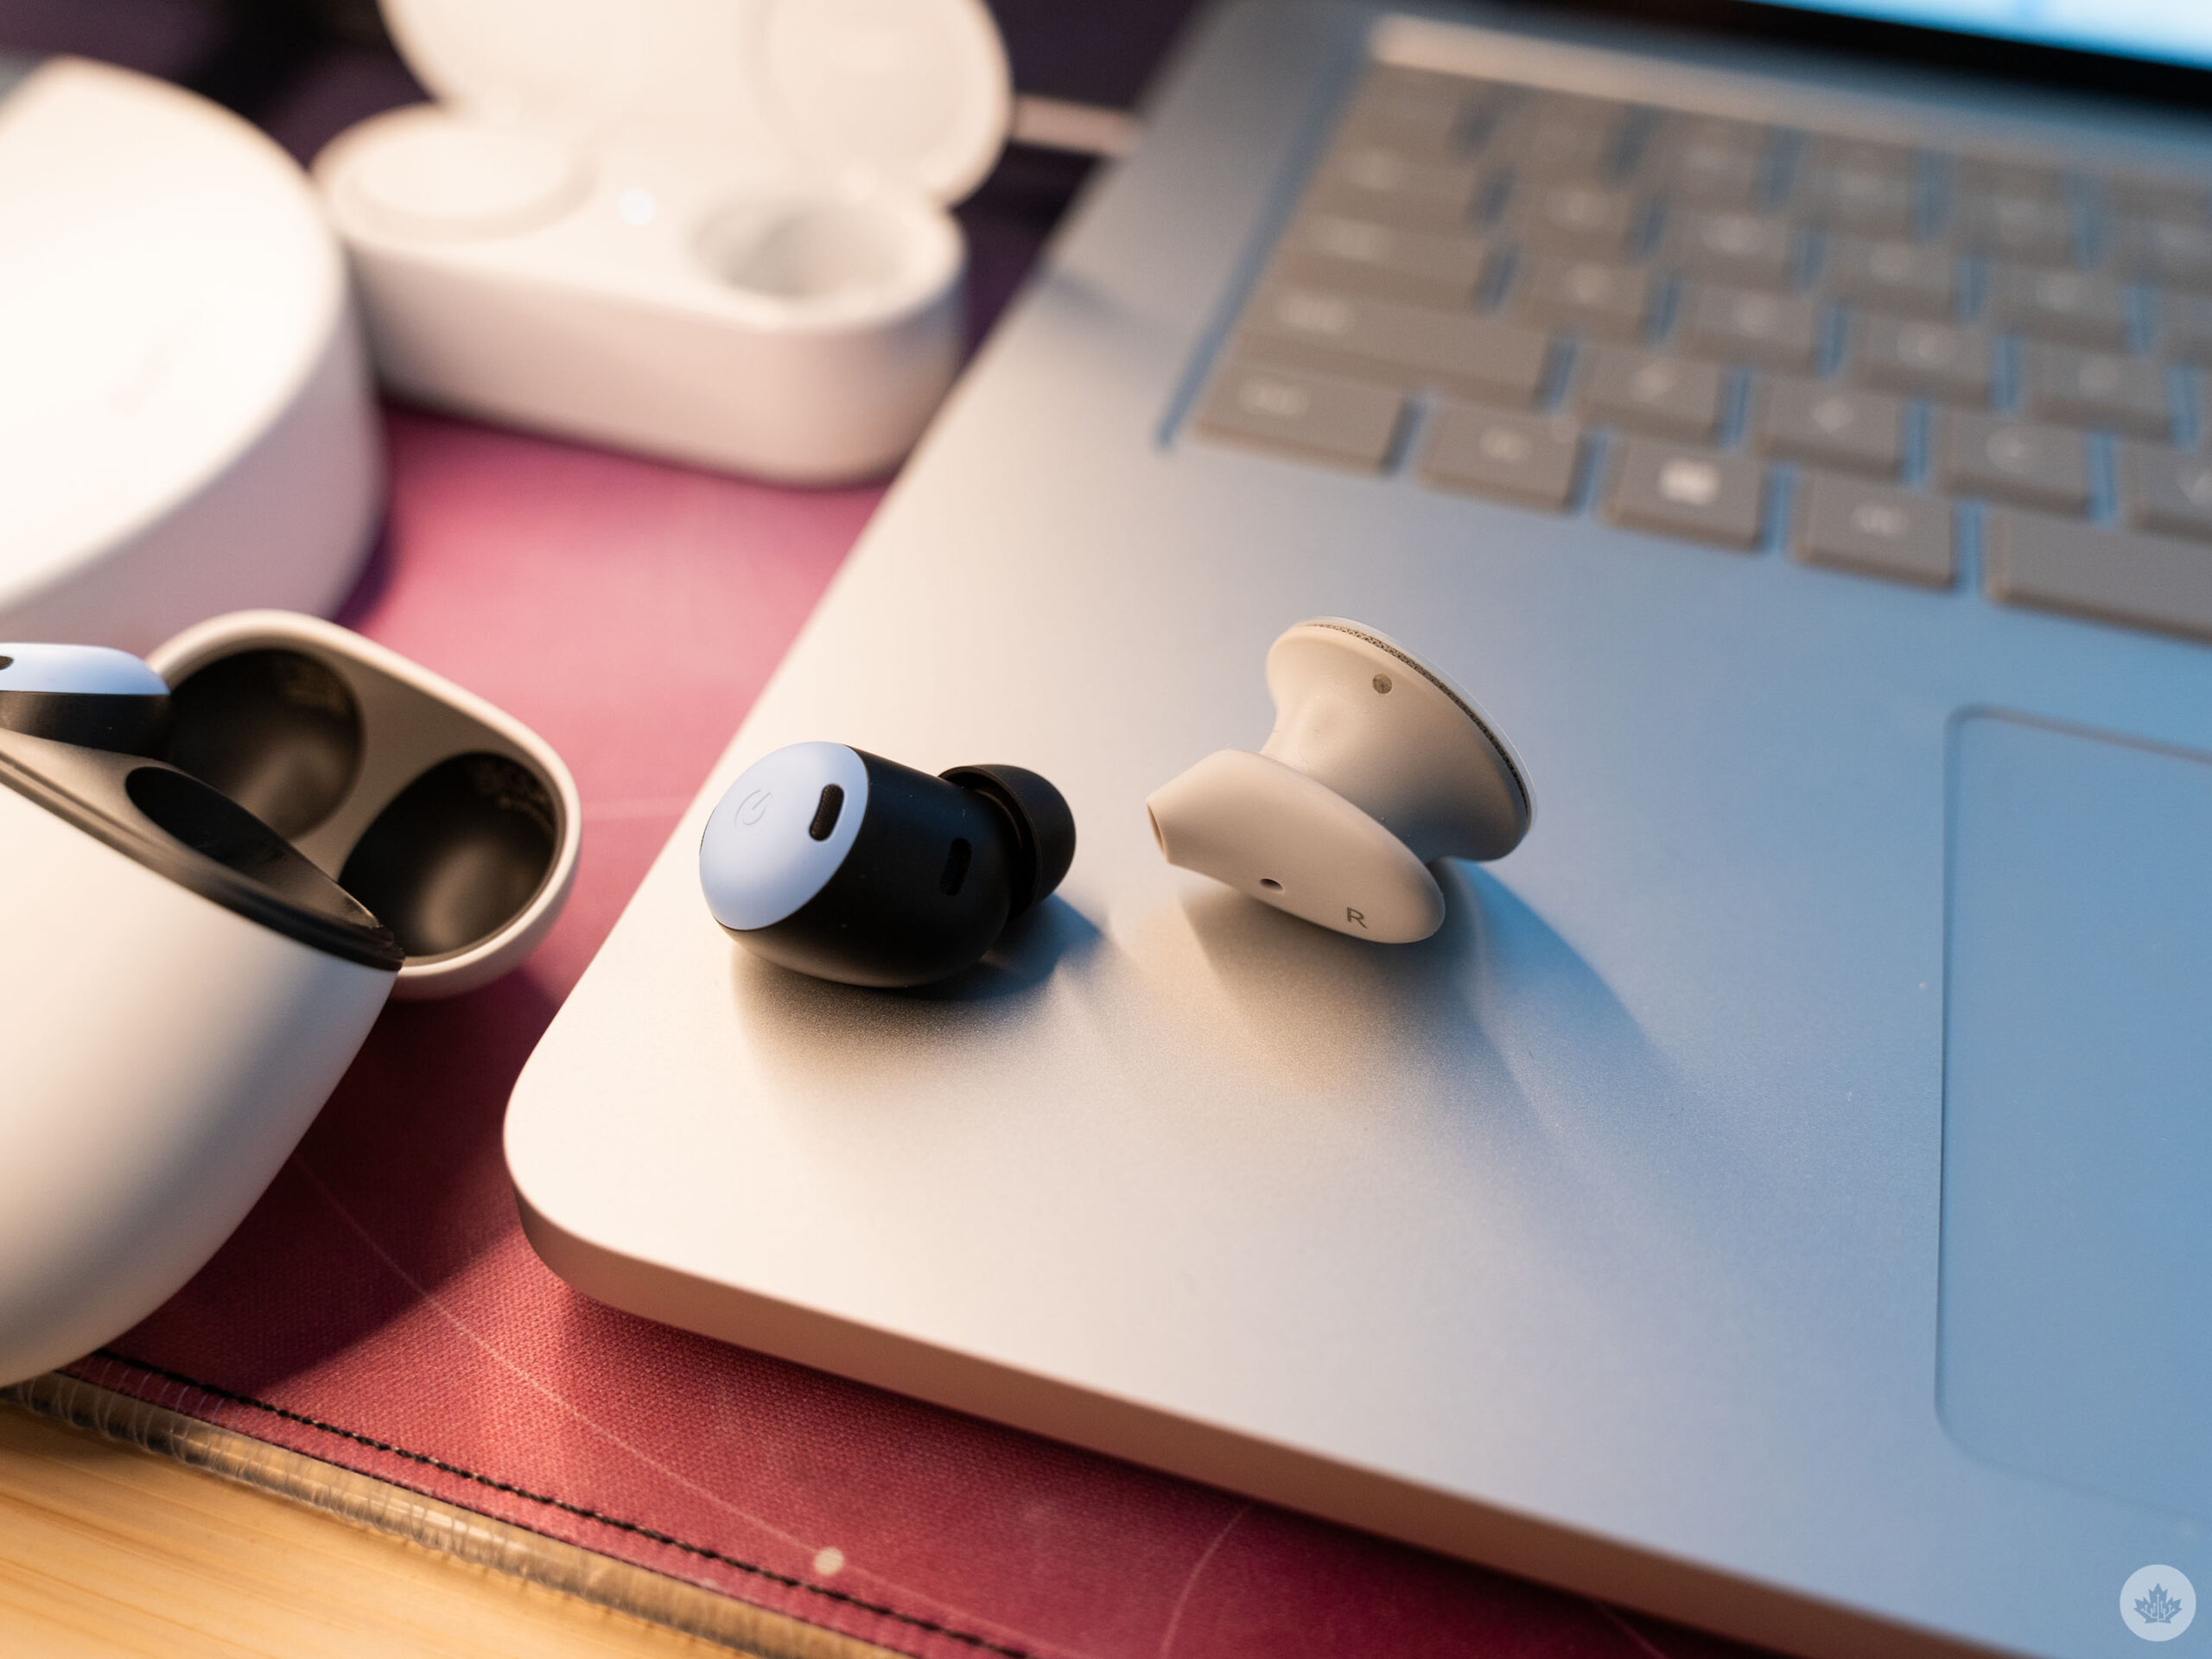 Google Pixel Buds Pro launch next week with this huge AirPods-style upgrade